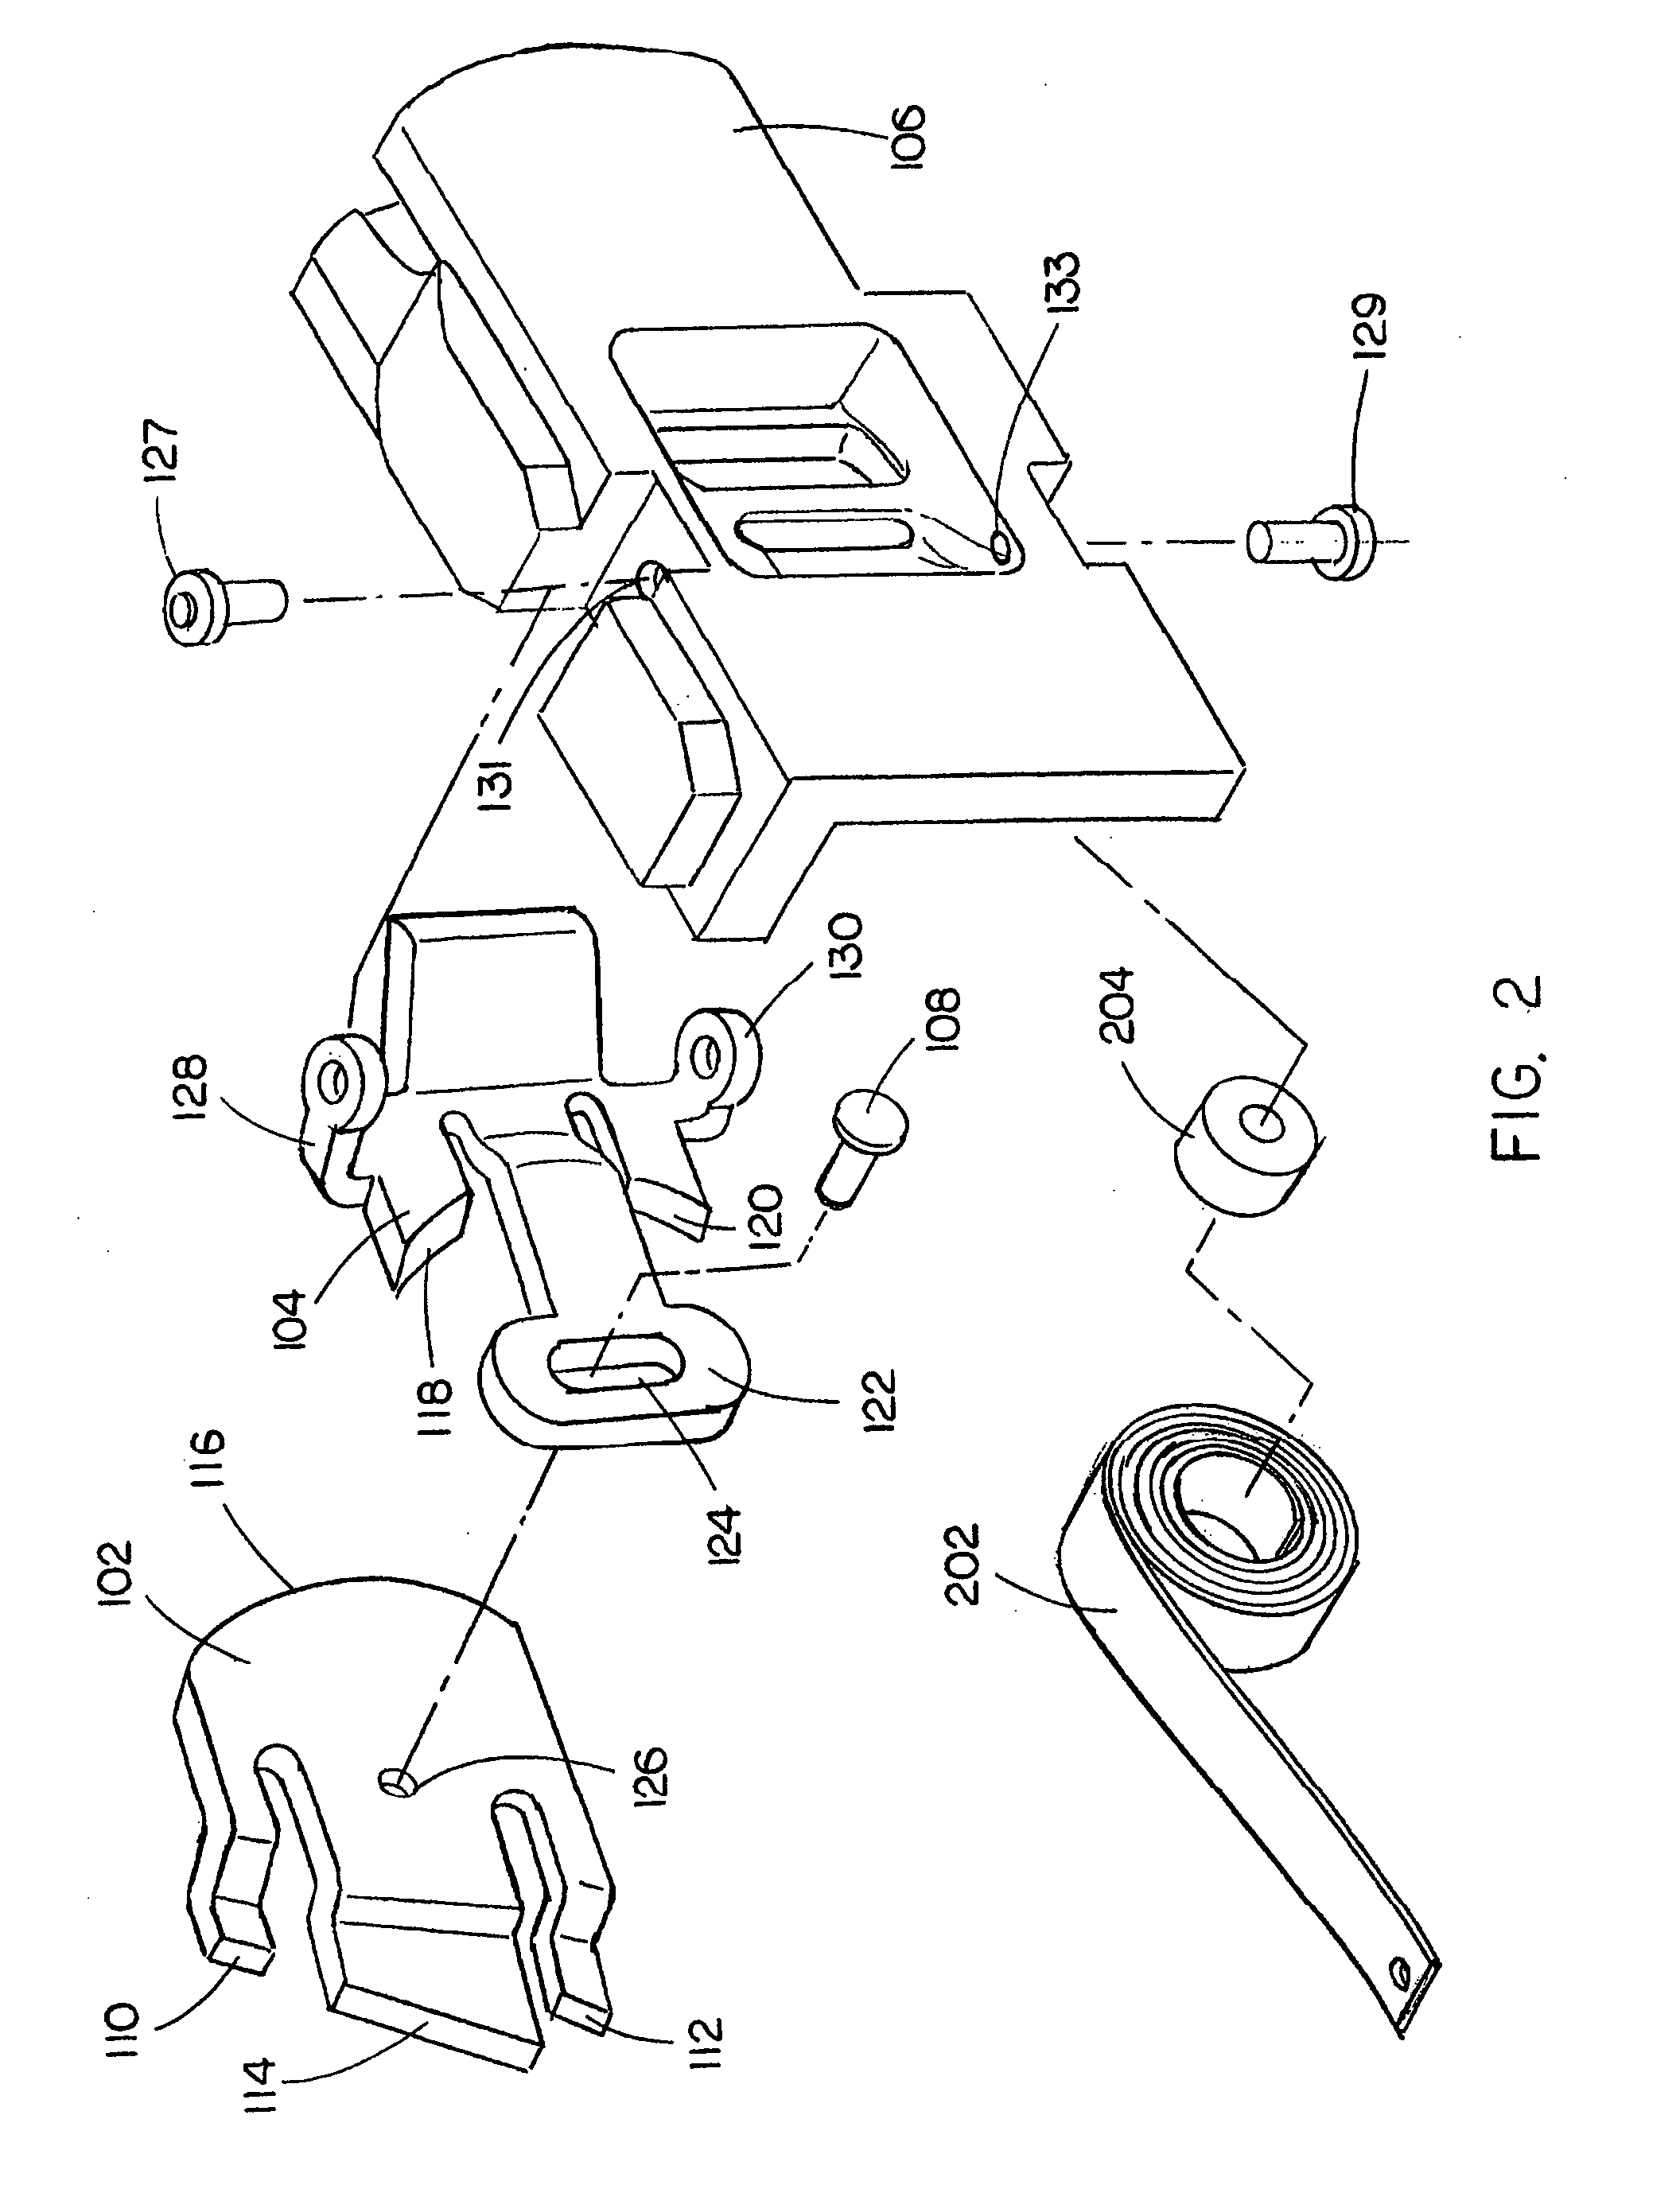 Articulating pusher assembly